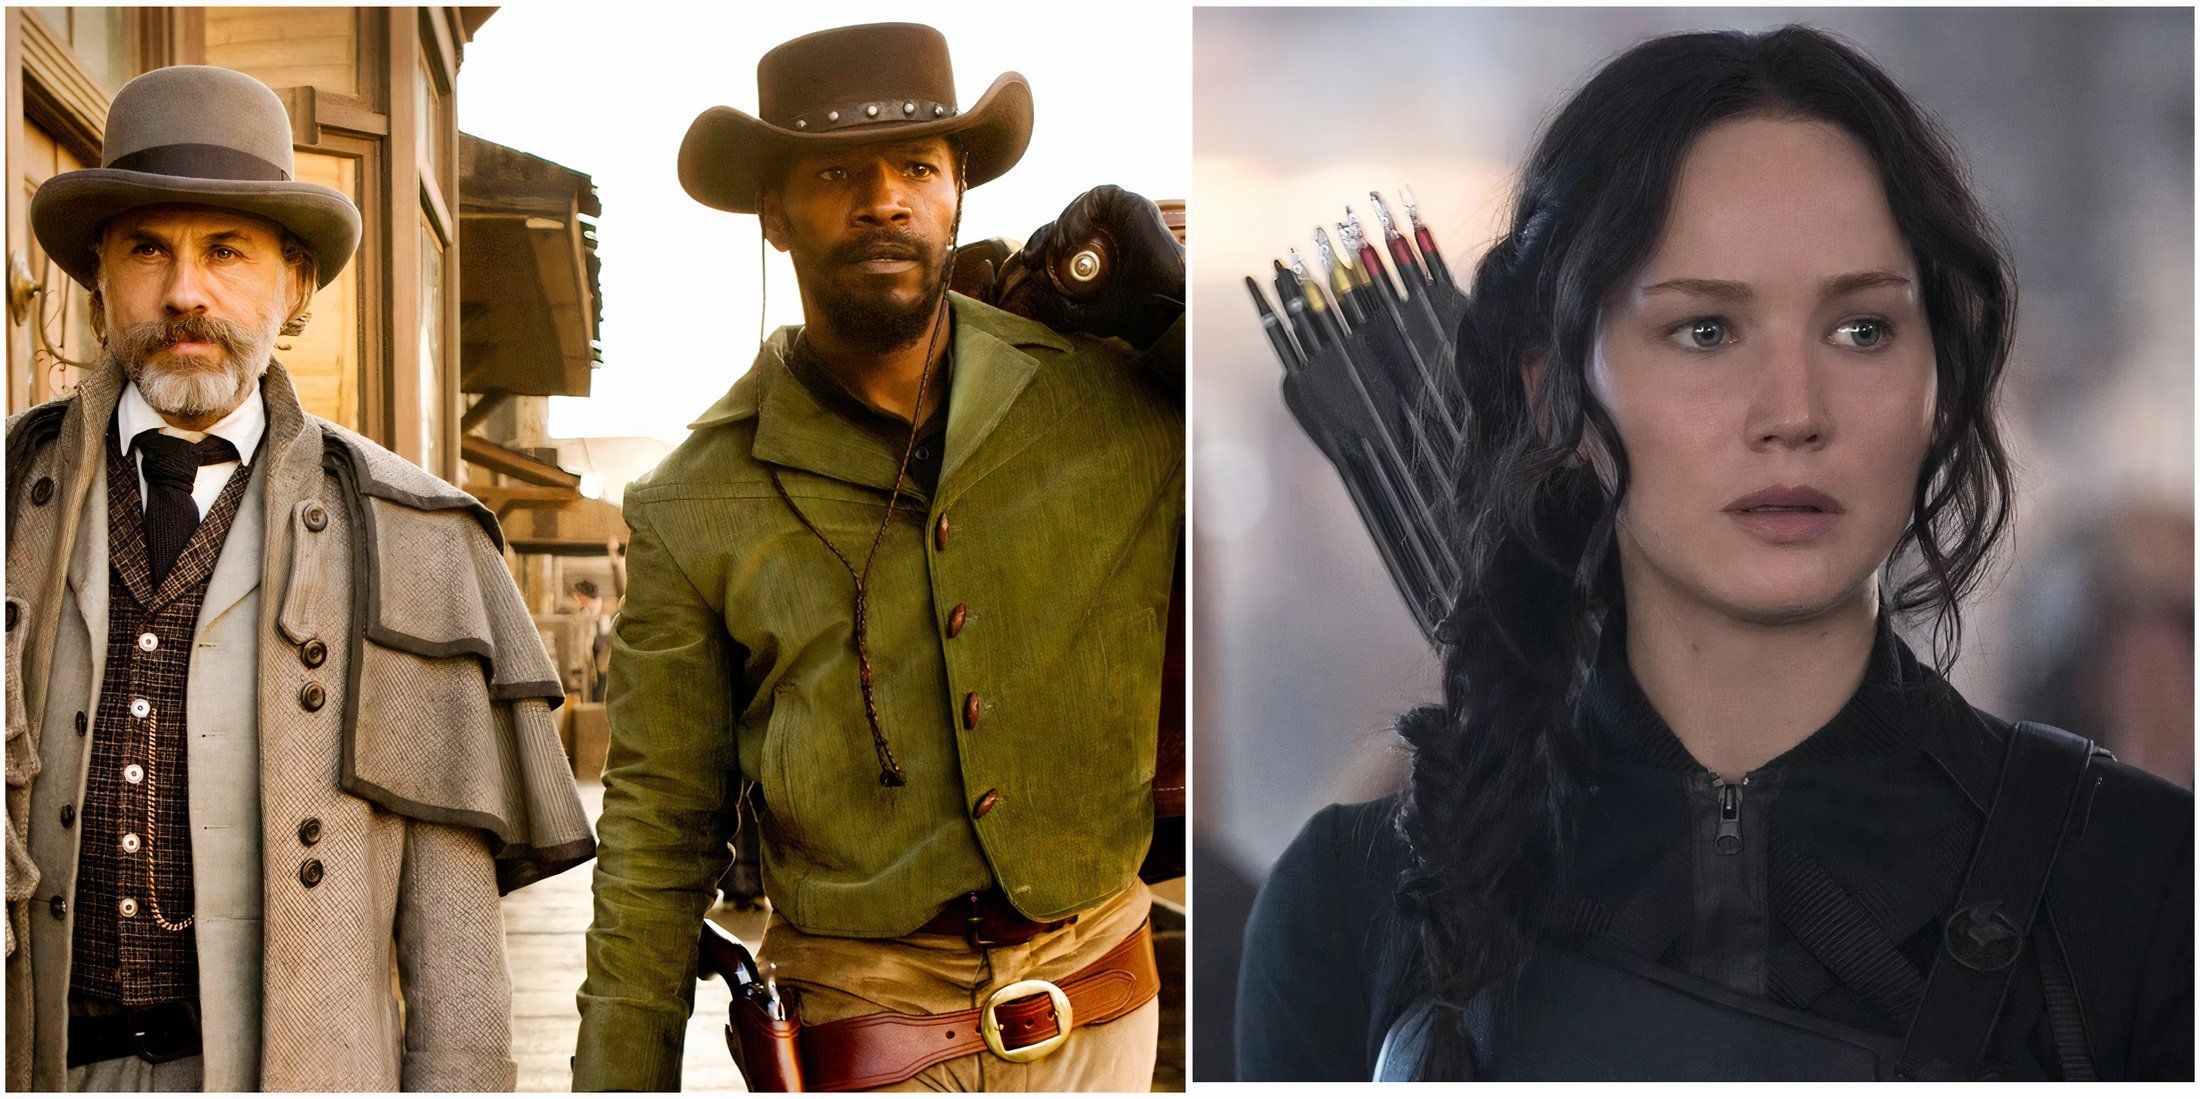 django unchained and the hunger games protagonists